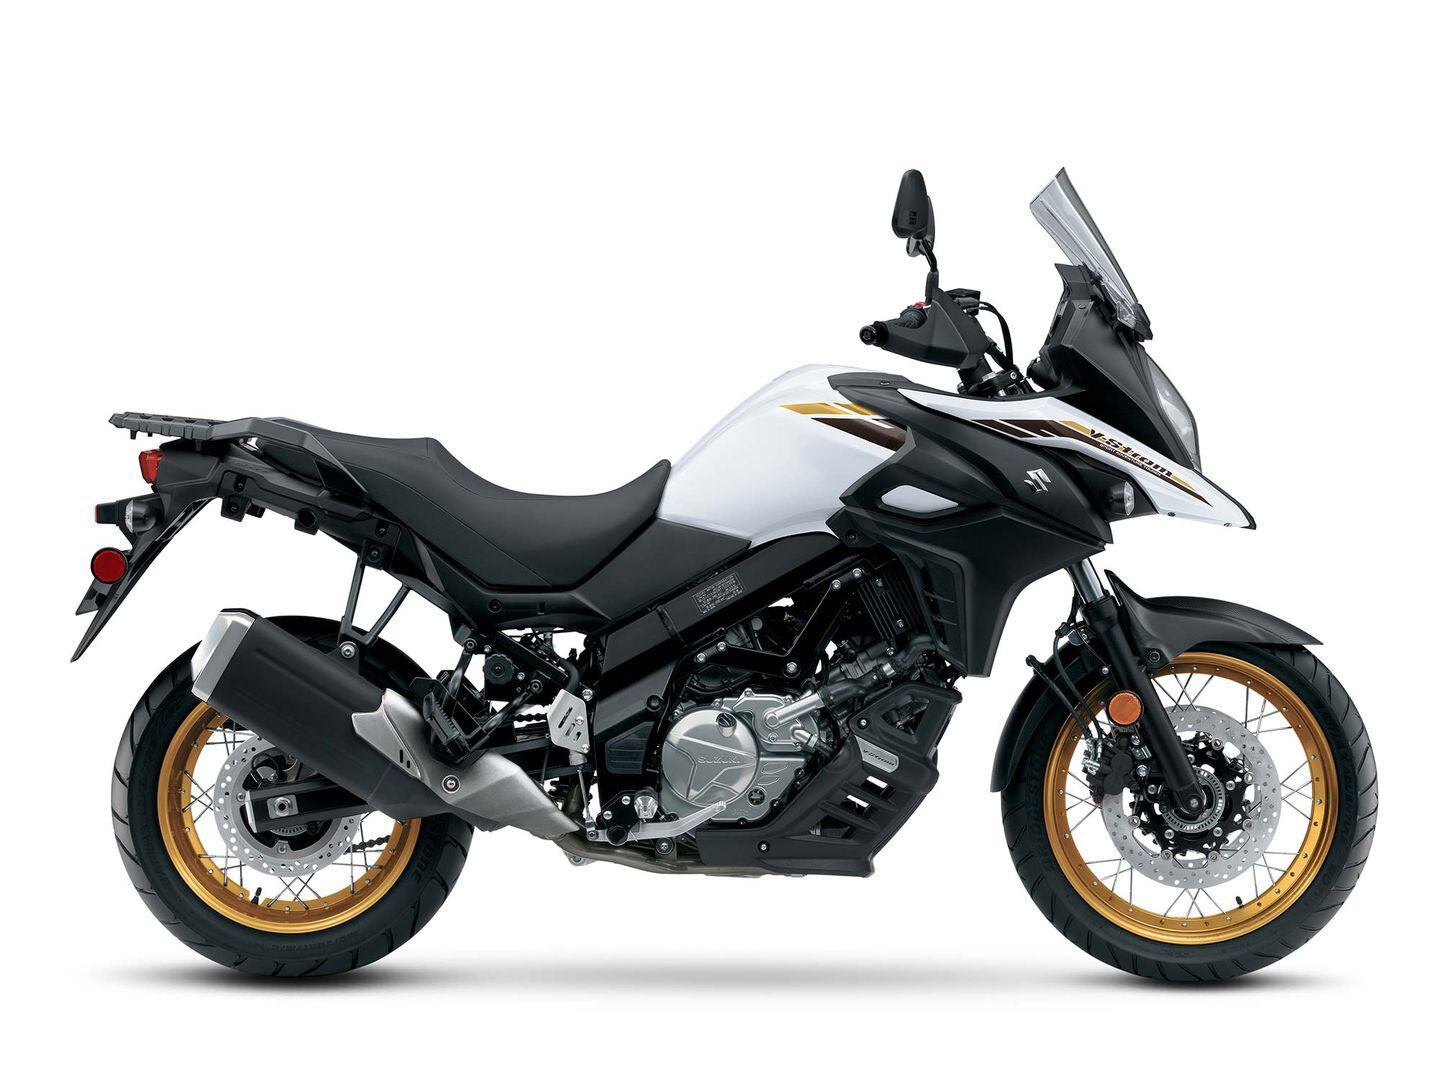 The 2023 Suzuki V-Strom 650XT without Adventure nomenclature and panniers.